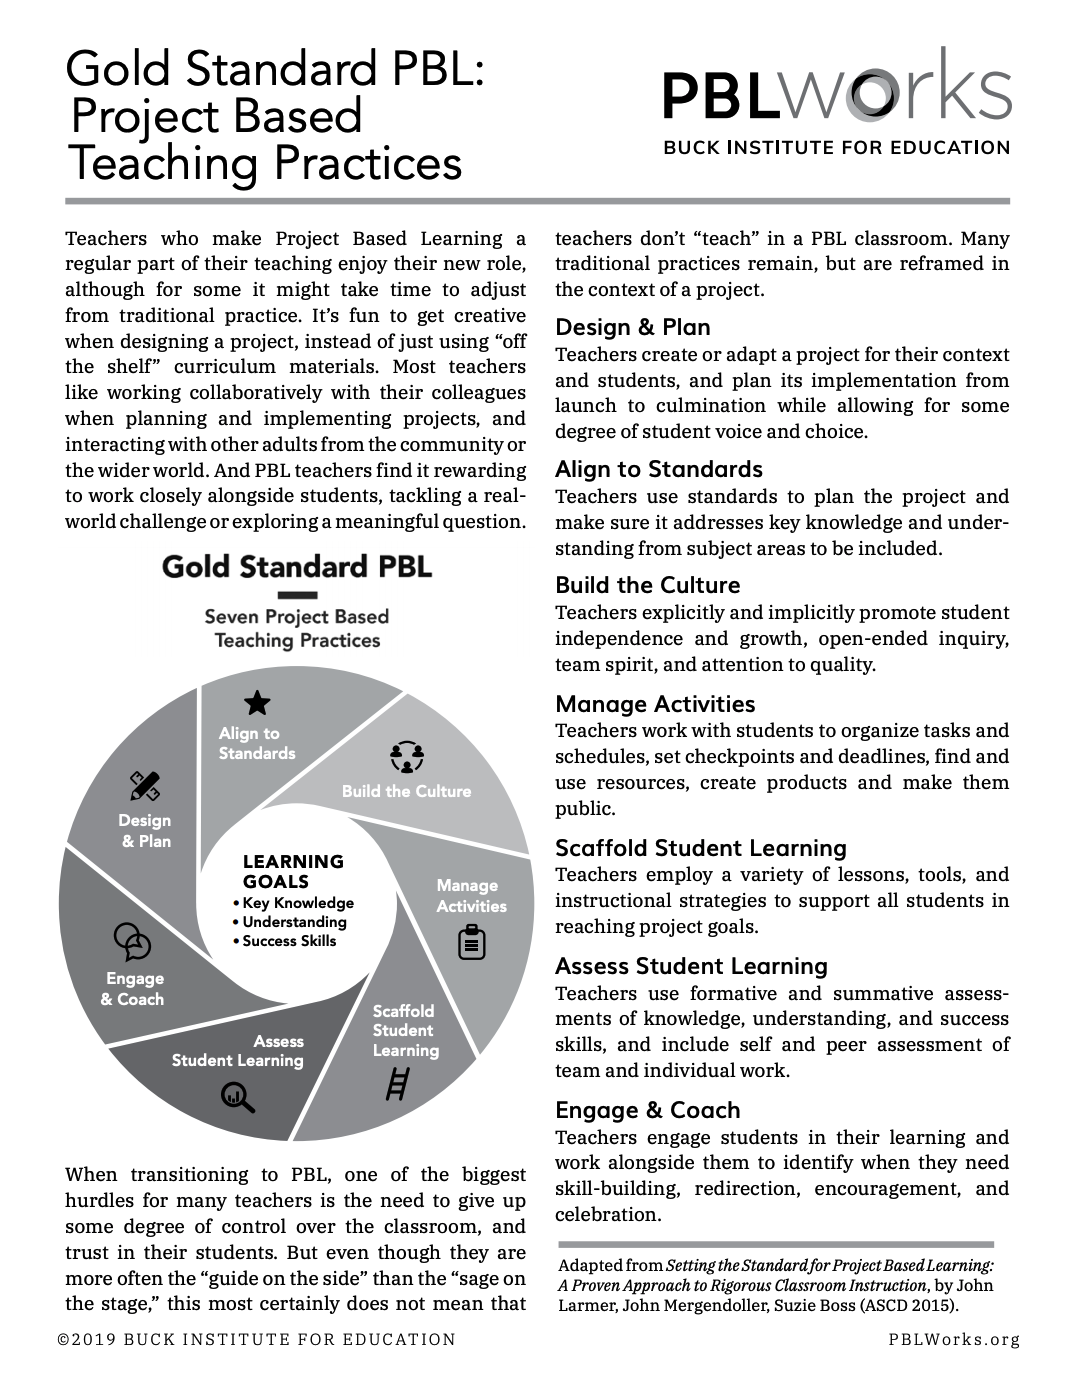 Gold Standard PBL Project Based Teaching Practices